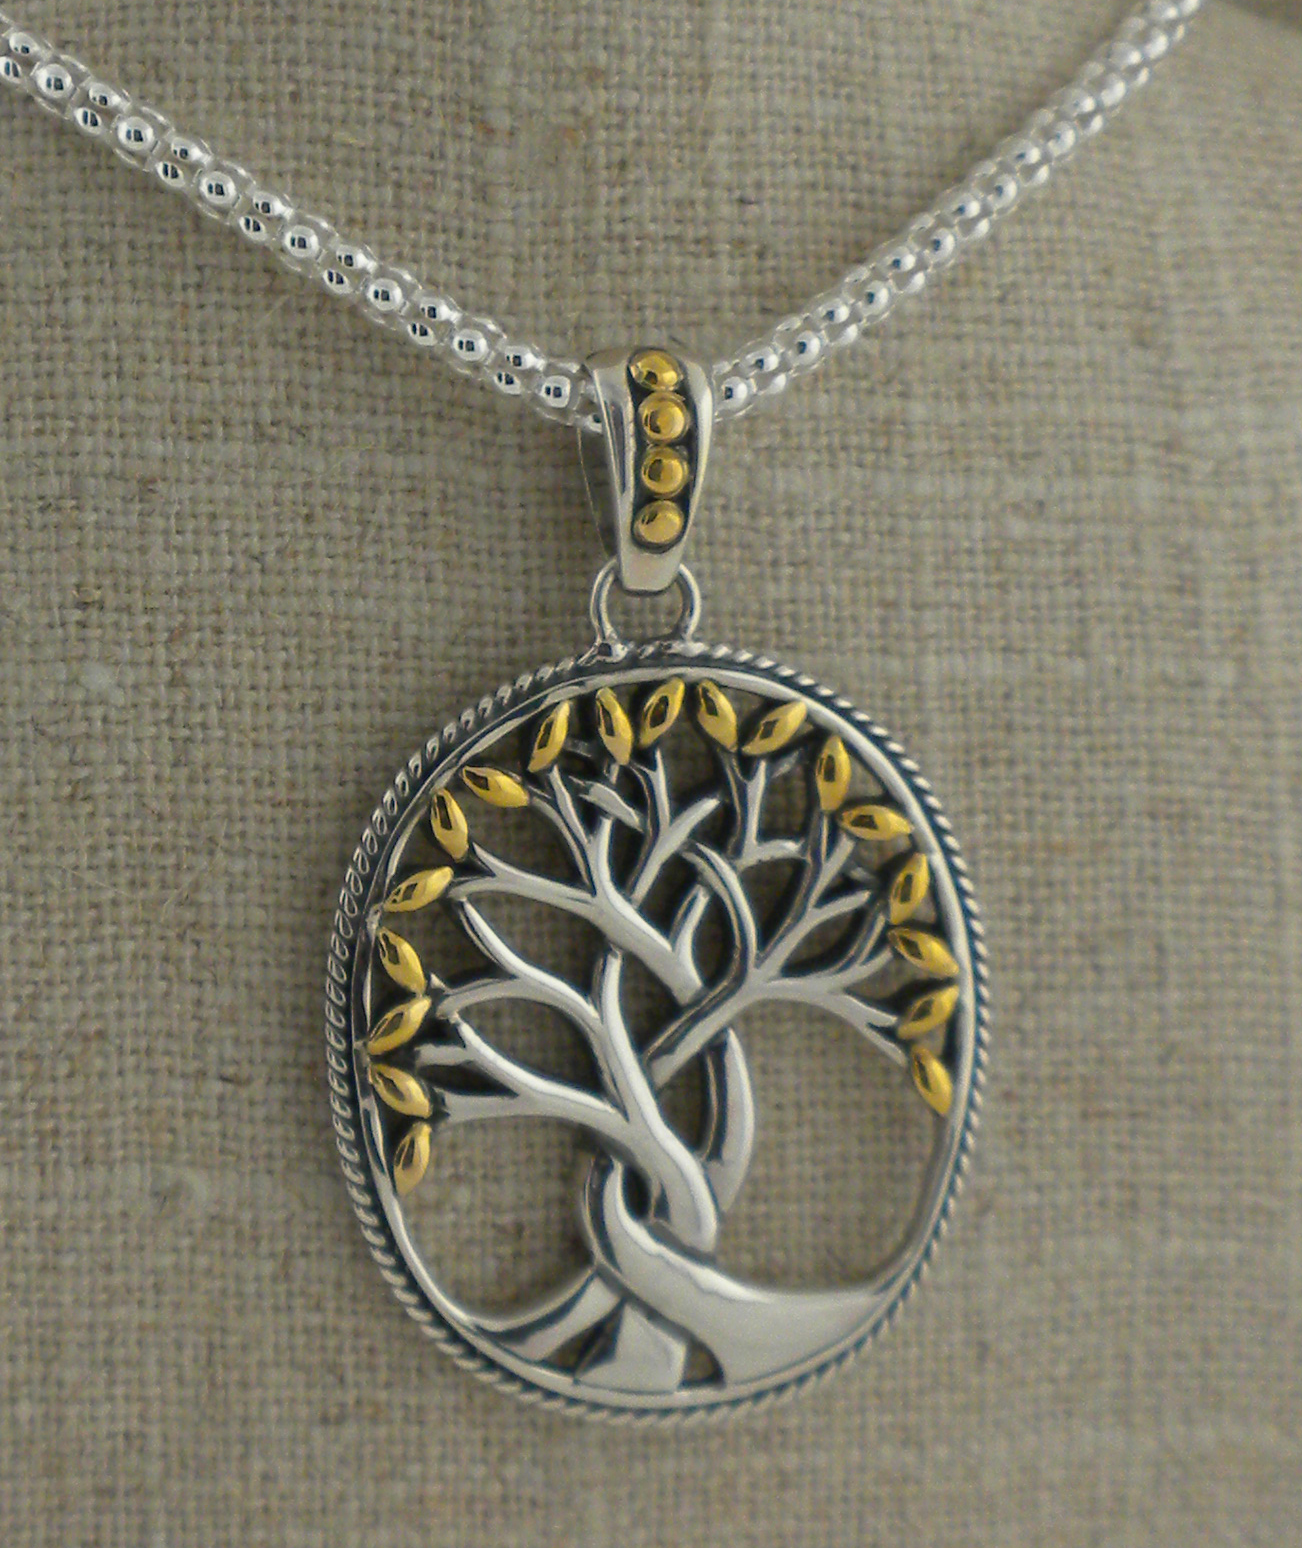 Copy of Celtic Tree of Life Pendant in Sterling Silver (Copy) (Copy)